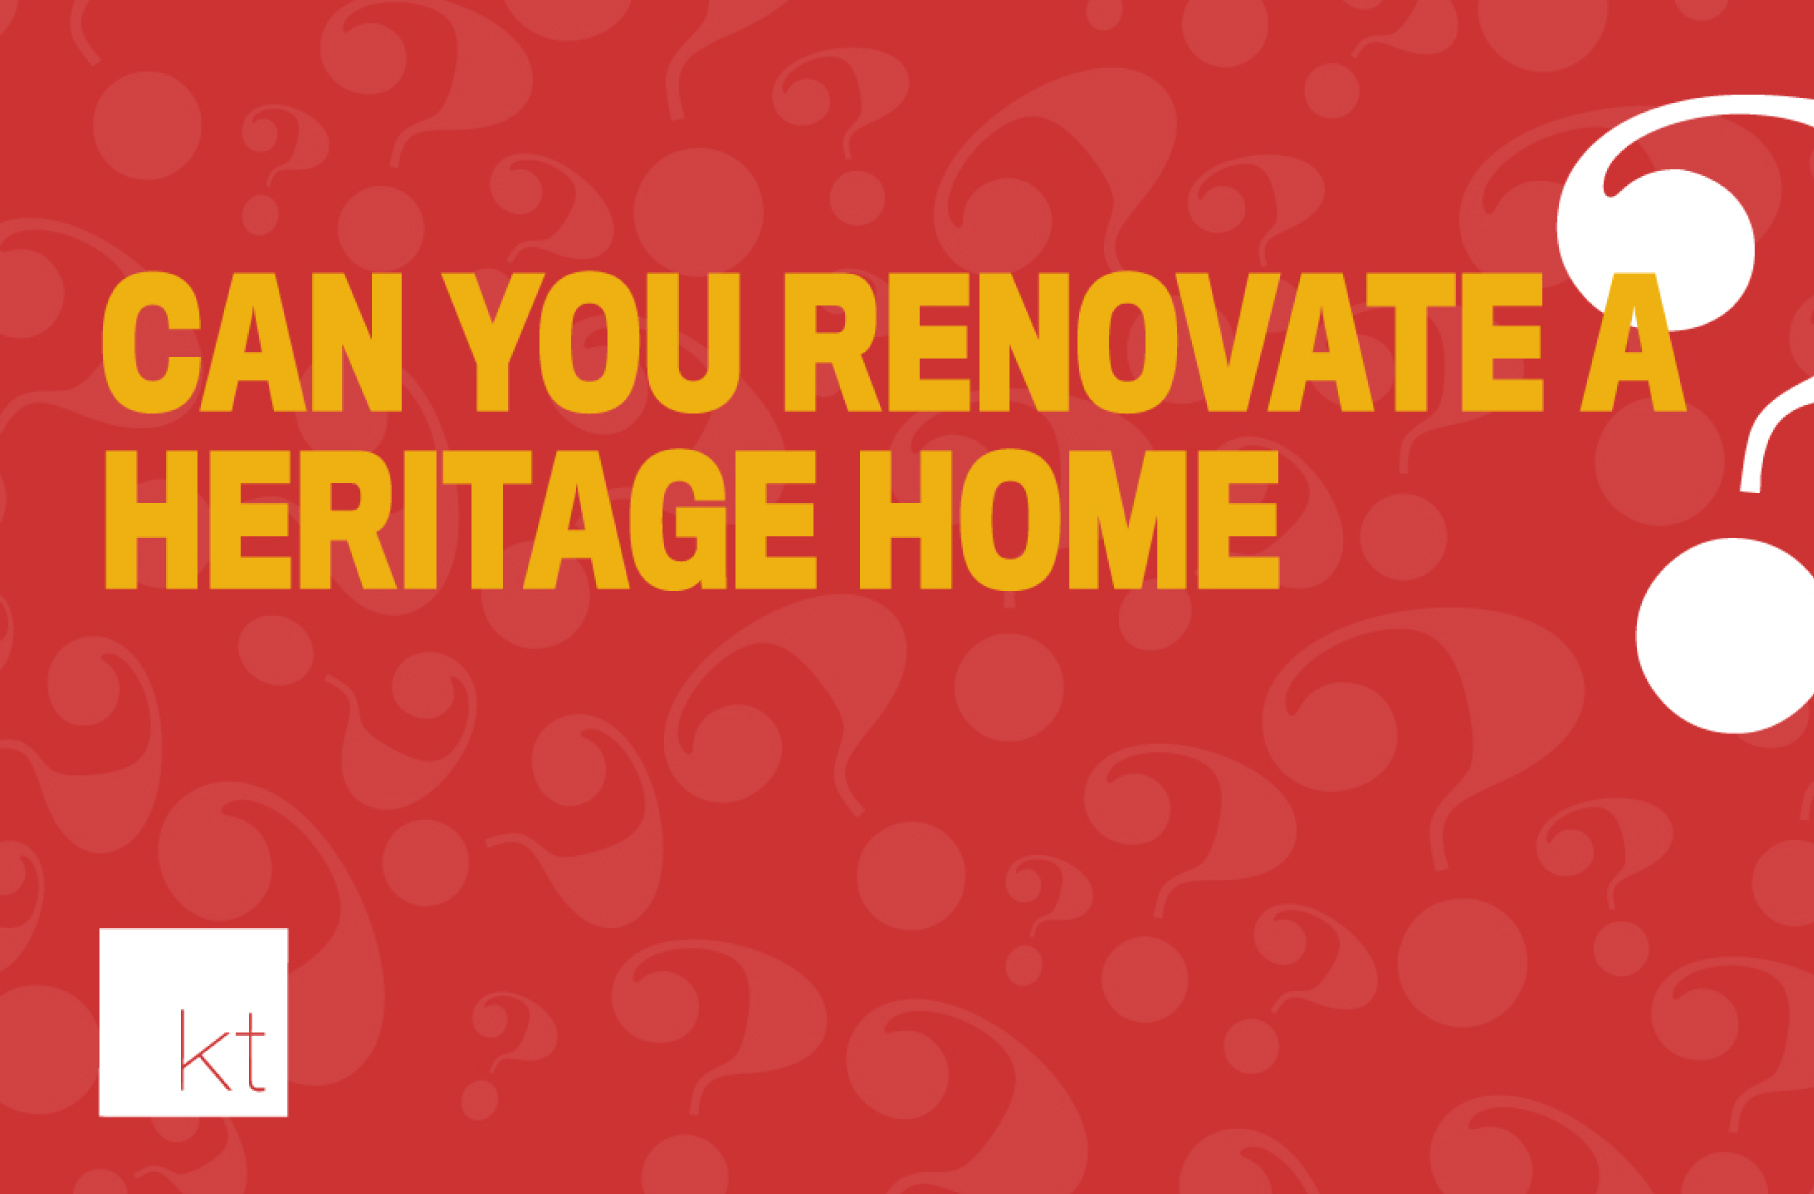 Renovating a heritage home